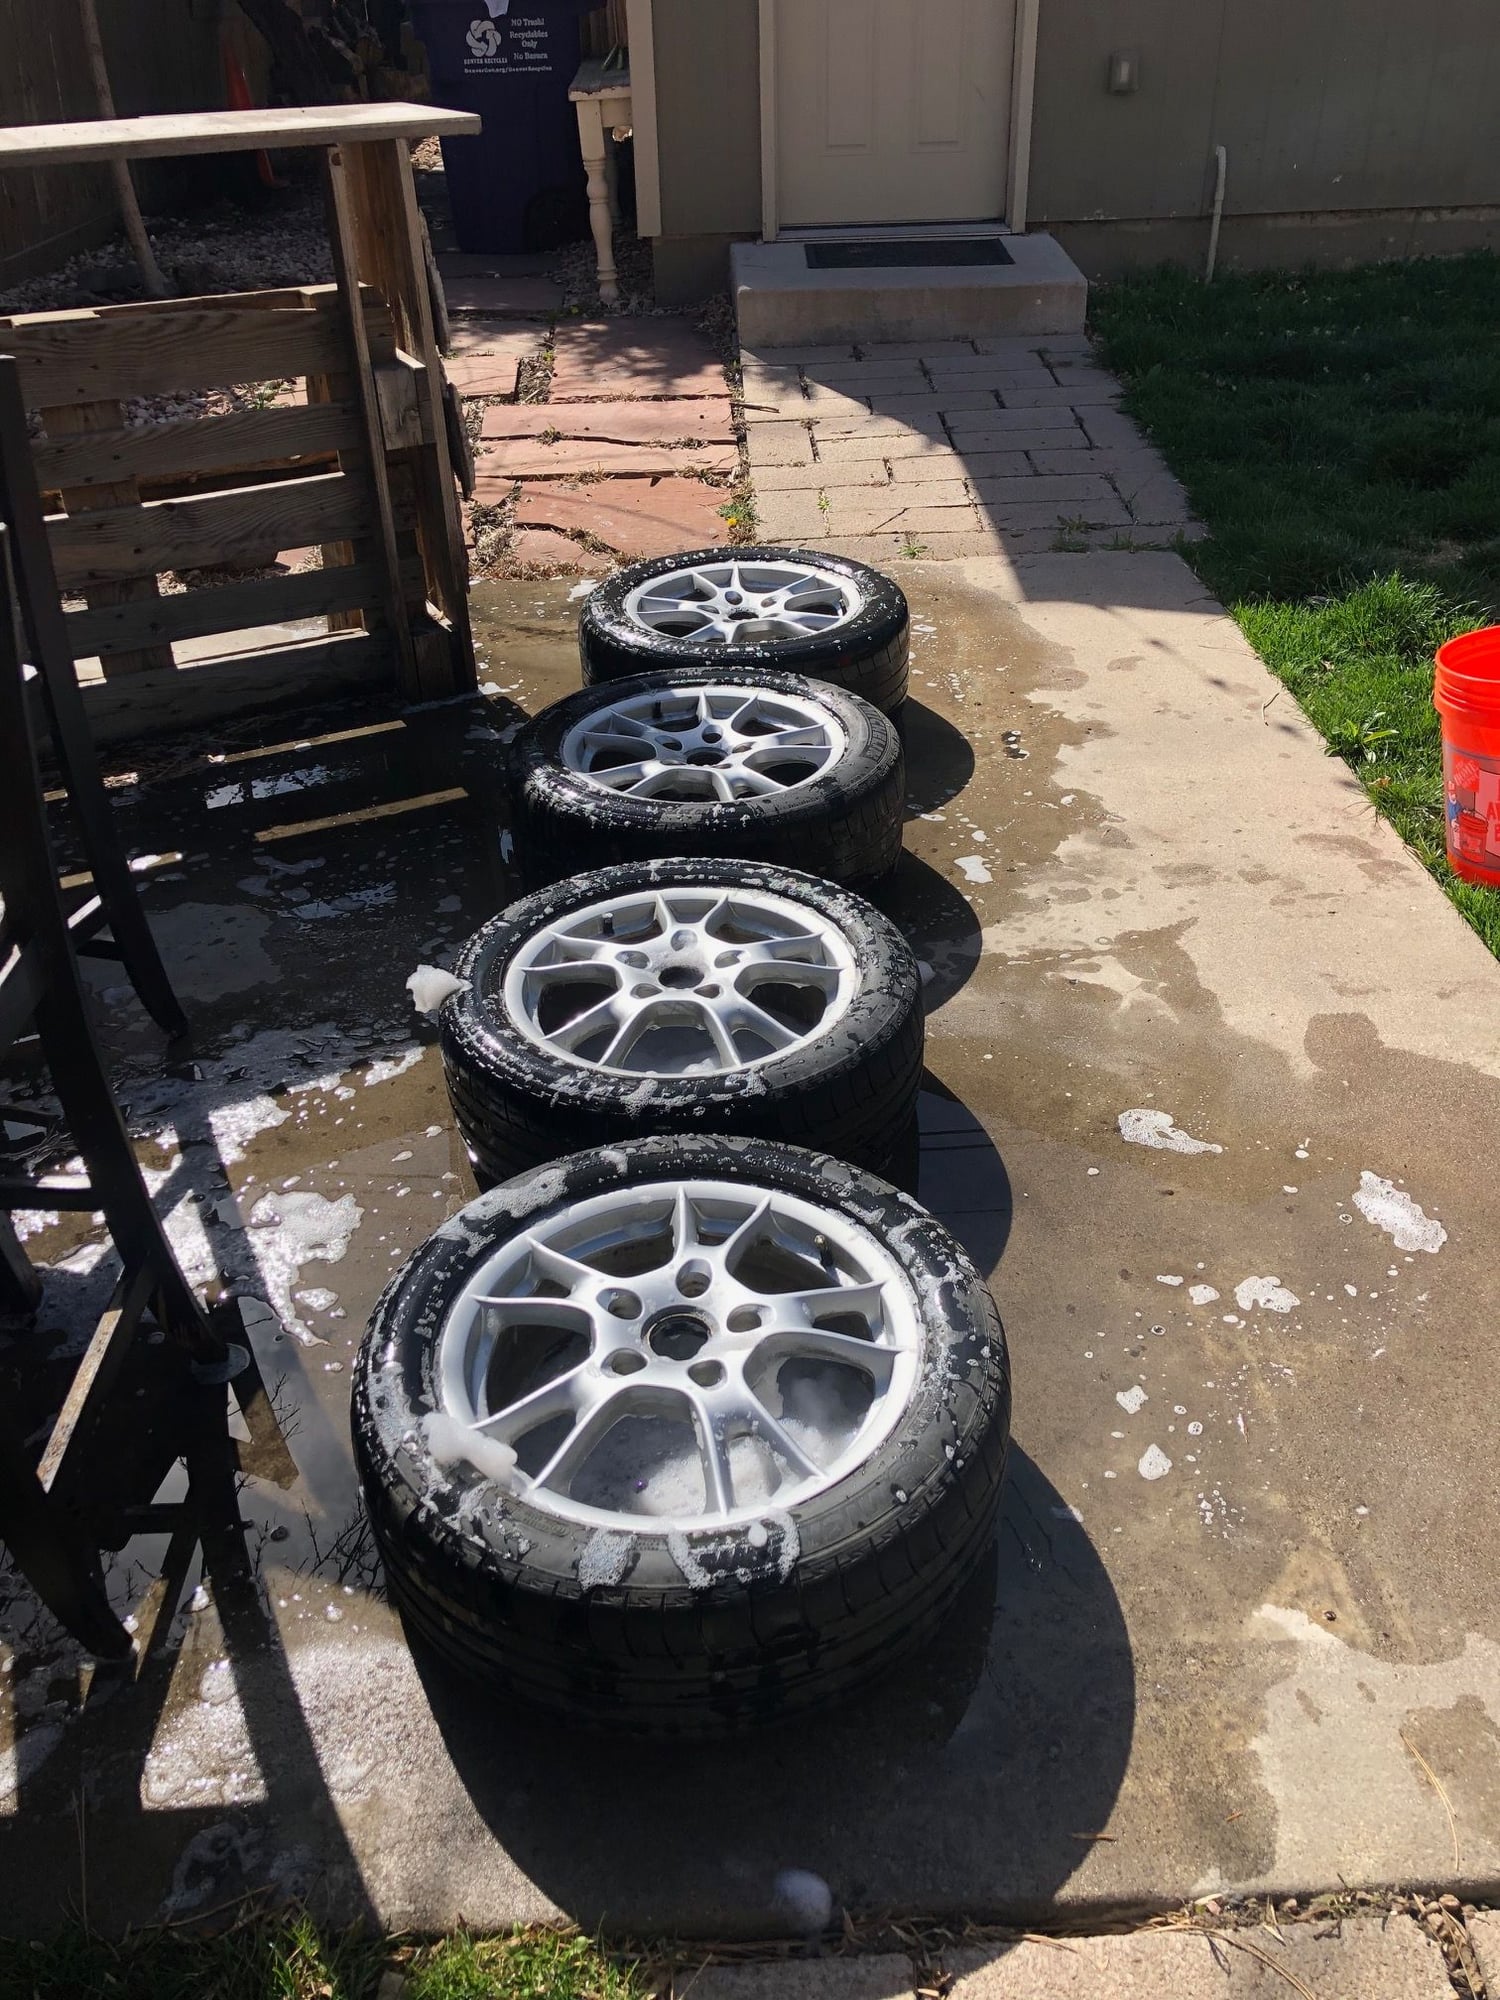 Wheels and Tires/Axles - 987 Boxster Wheels - Used - Denver, CO 80204, United States